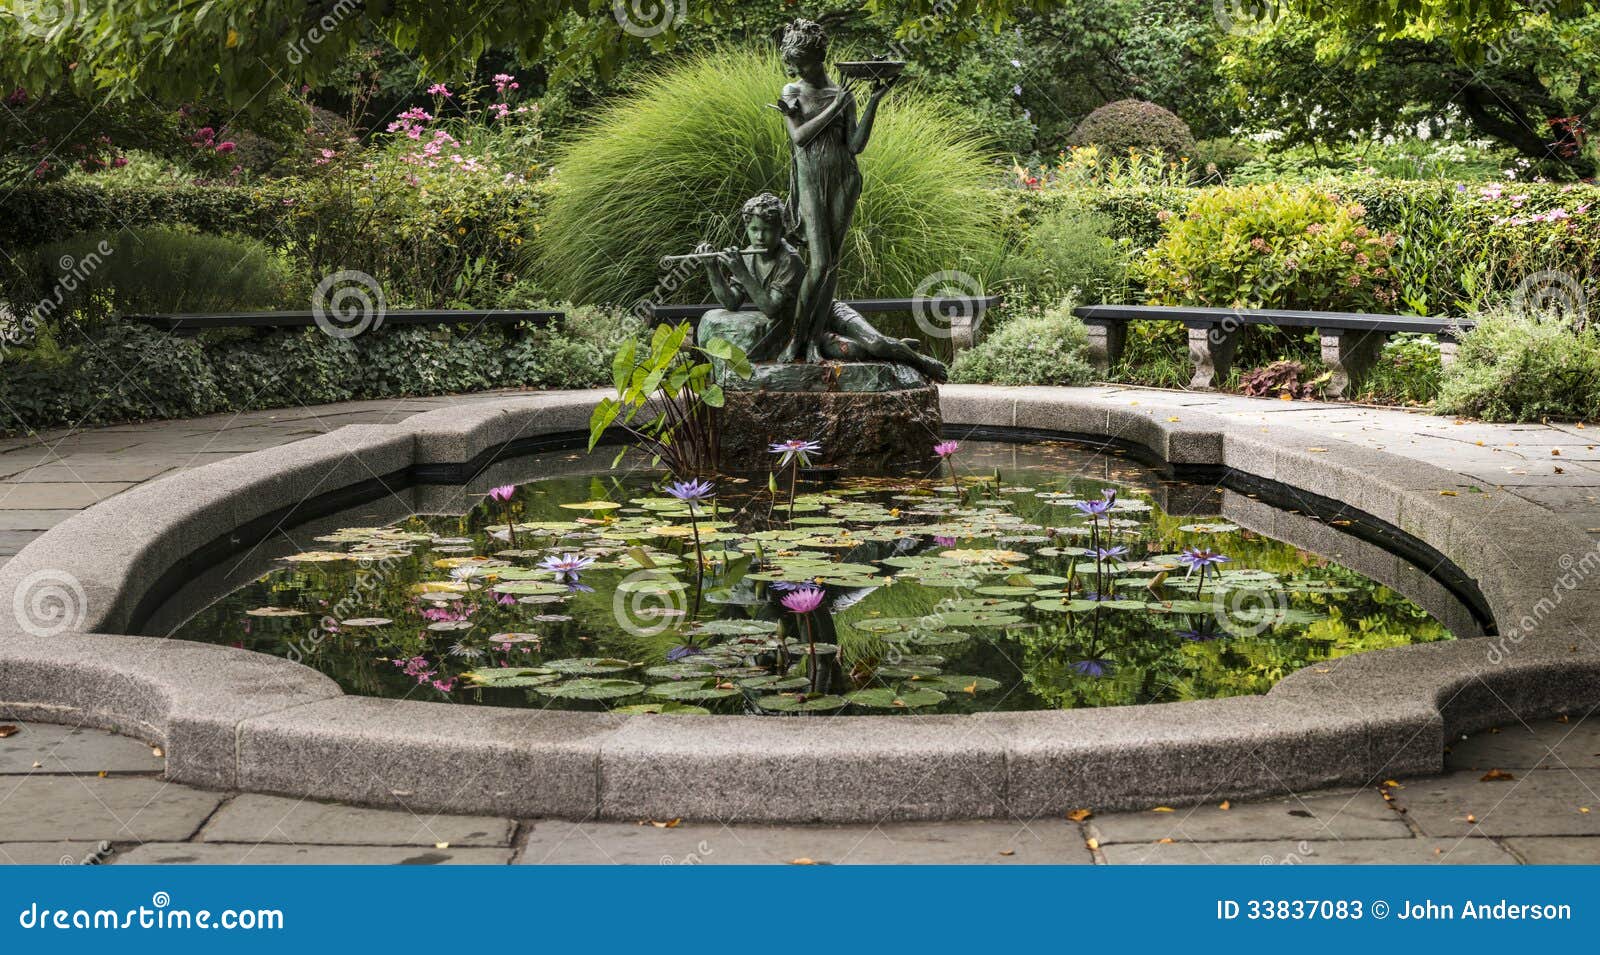 The Conservatory Garden Central Park New York City Stock Image